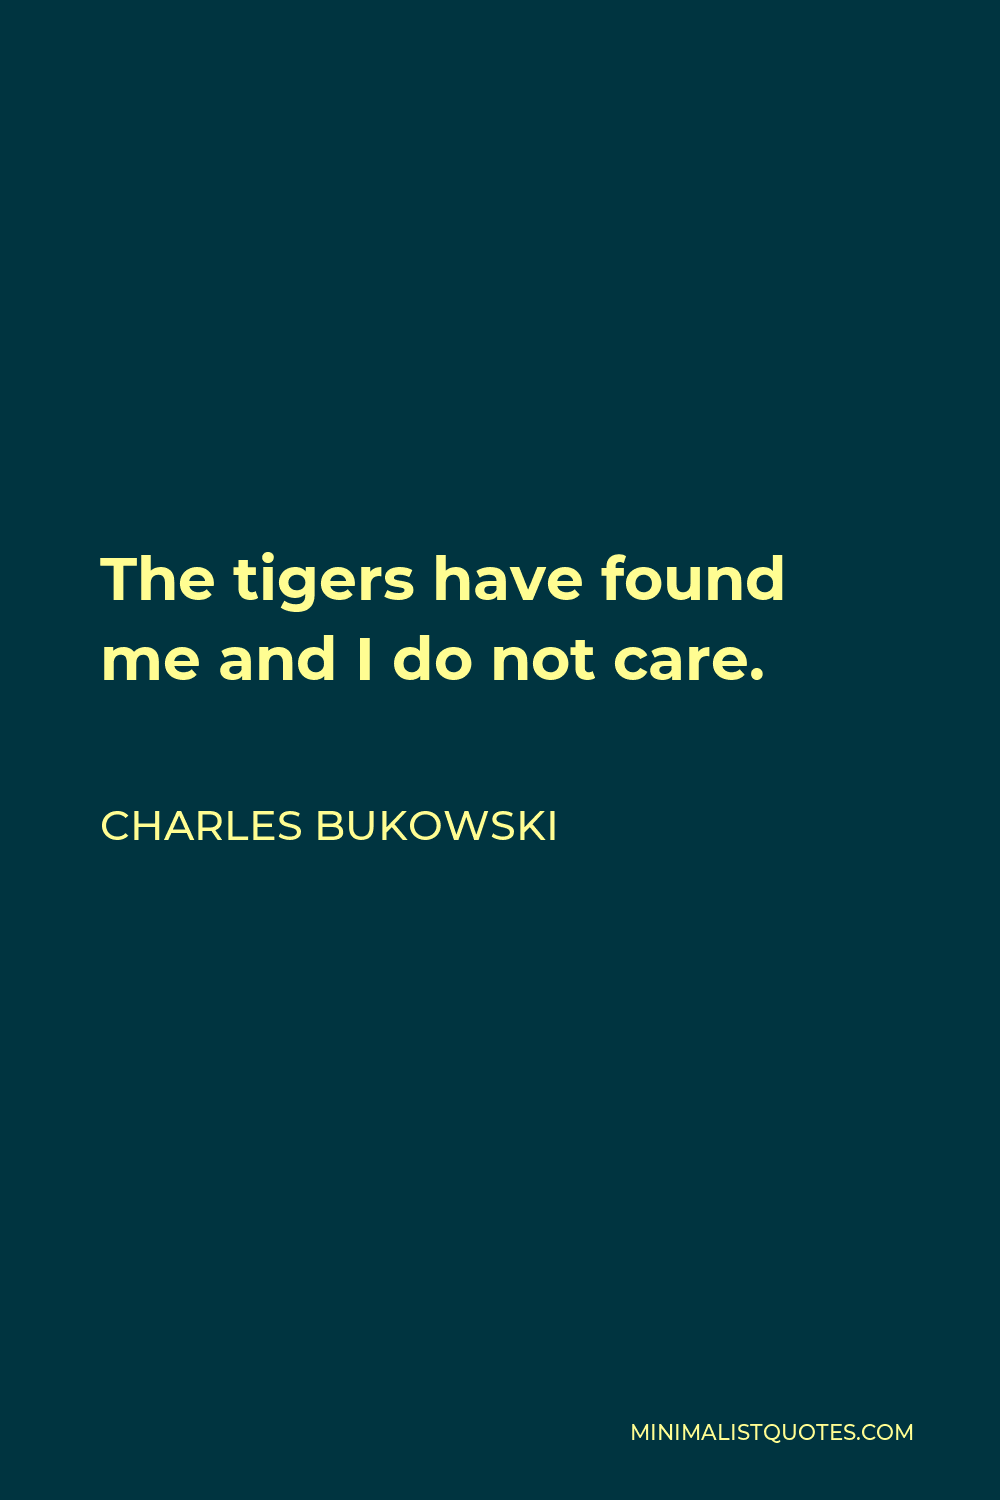 Charles Bukowski Quote - The tigers have found me and I do not care.